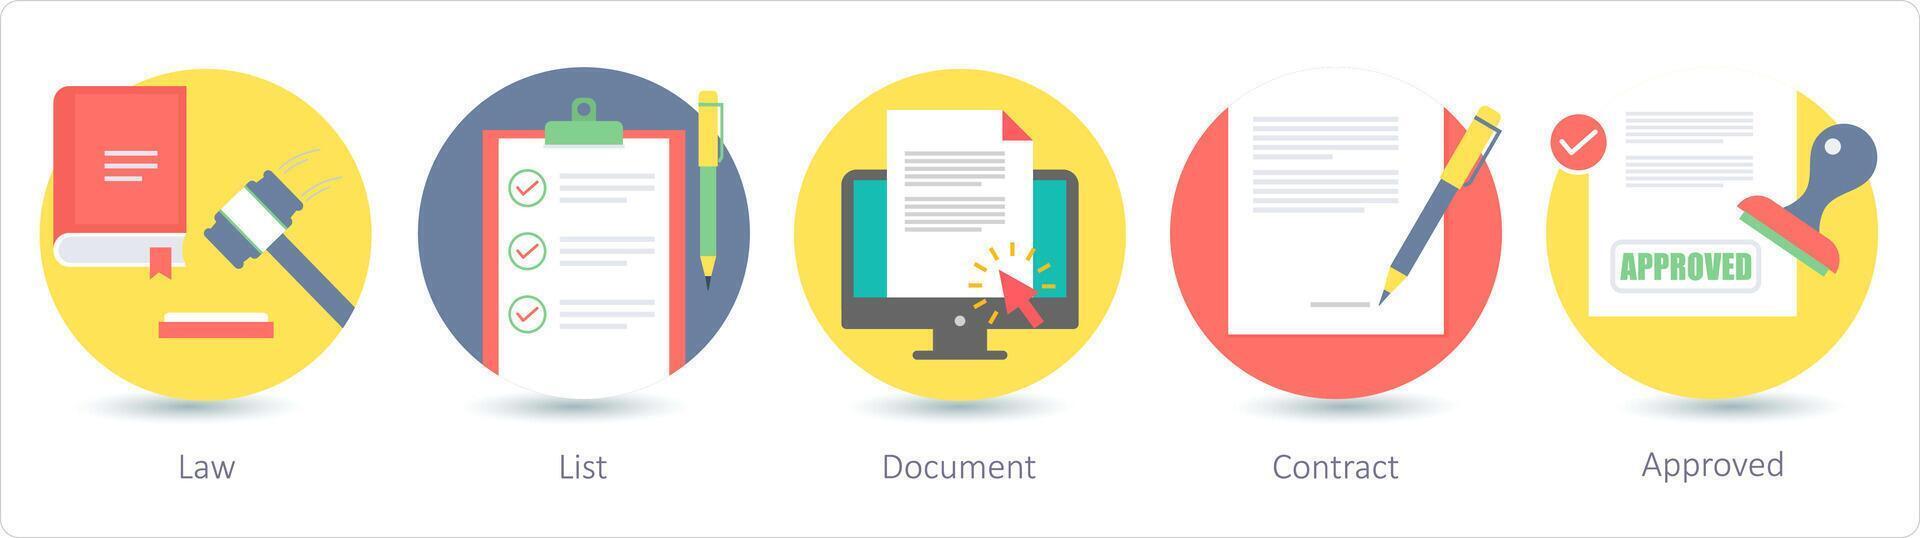 A set of 5 business icons as law, list, document vector